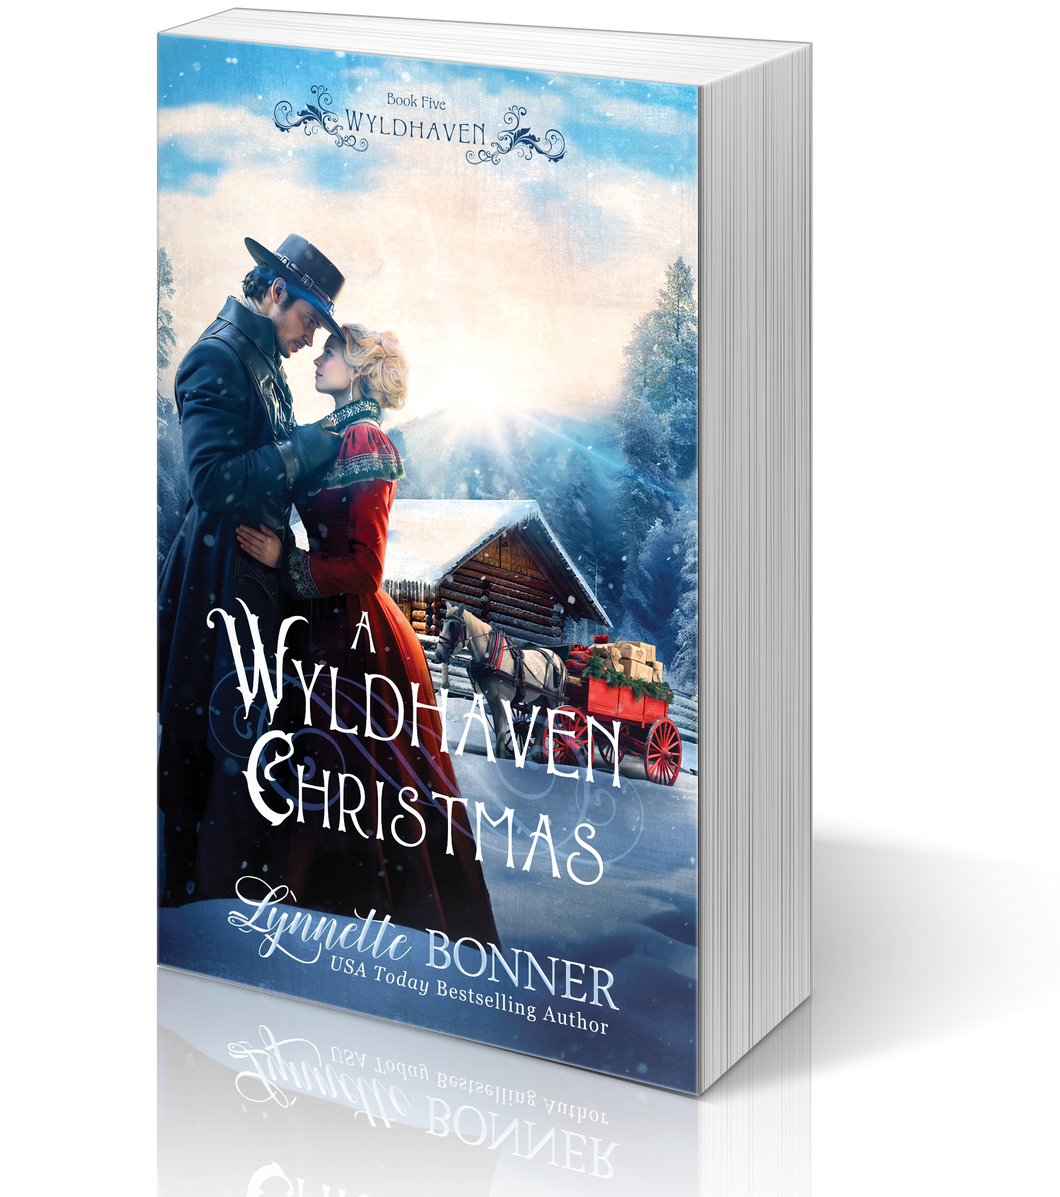 A Wyldhaven Christmas - Wyldhaven, Book 5 - Signed Paperback